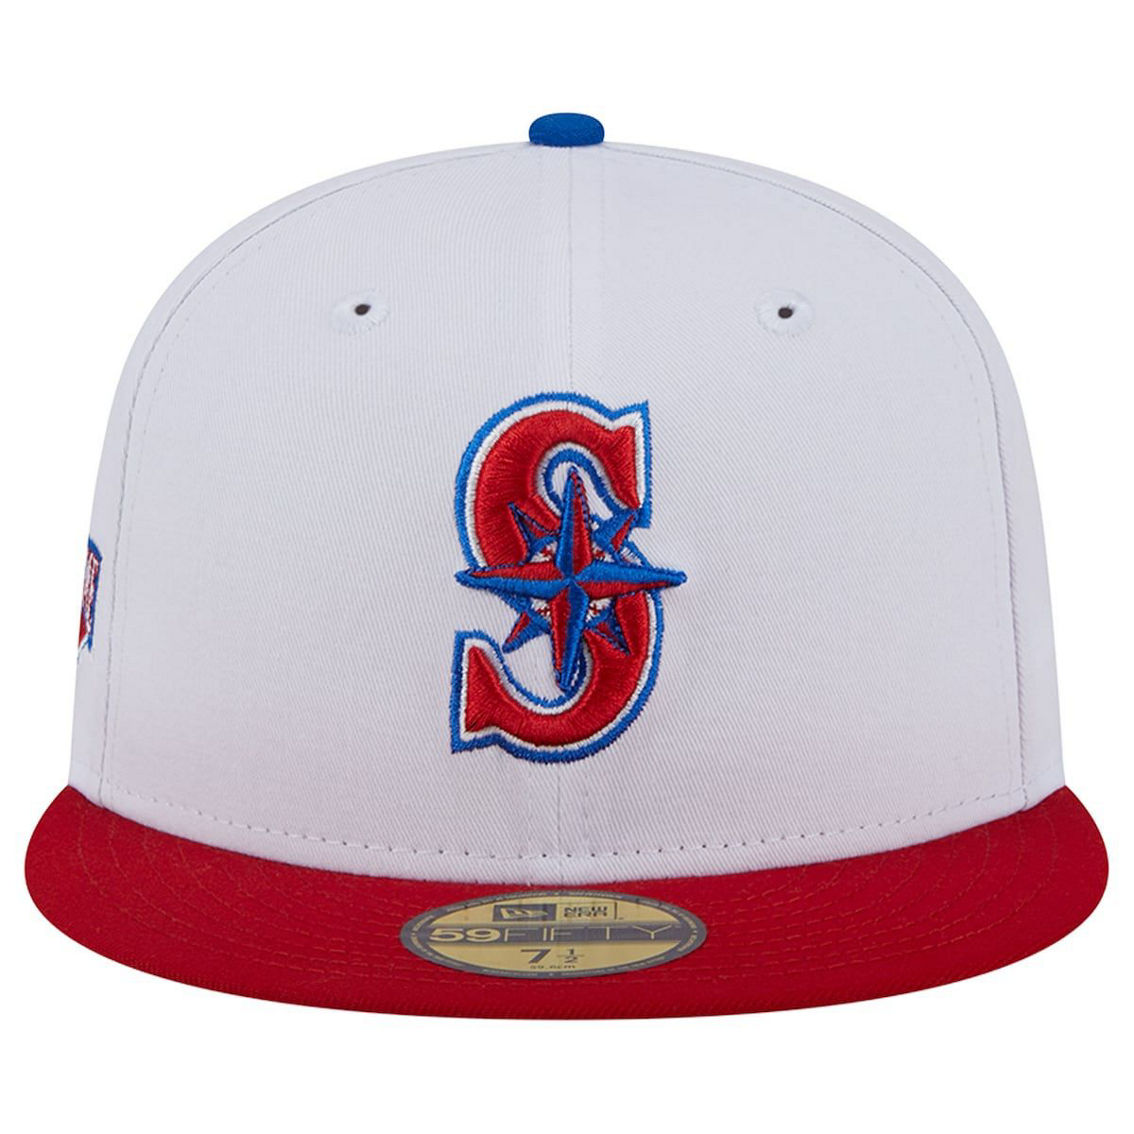 Men’s Seattle Mariners Royal Team Red White Blue 59FIFTY Fitted Hats